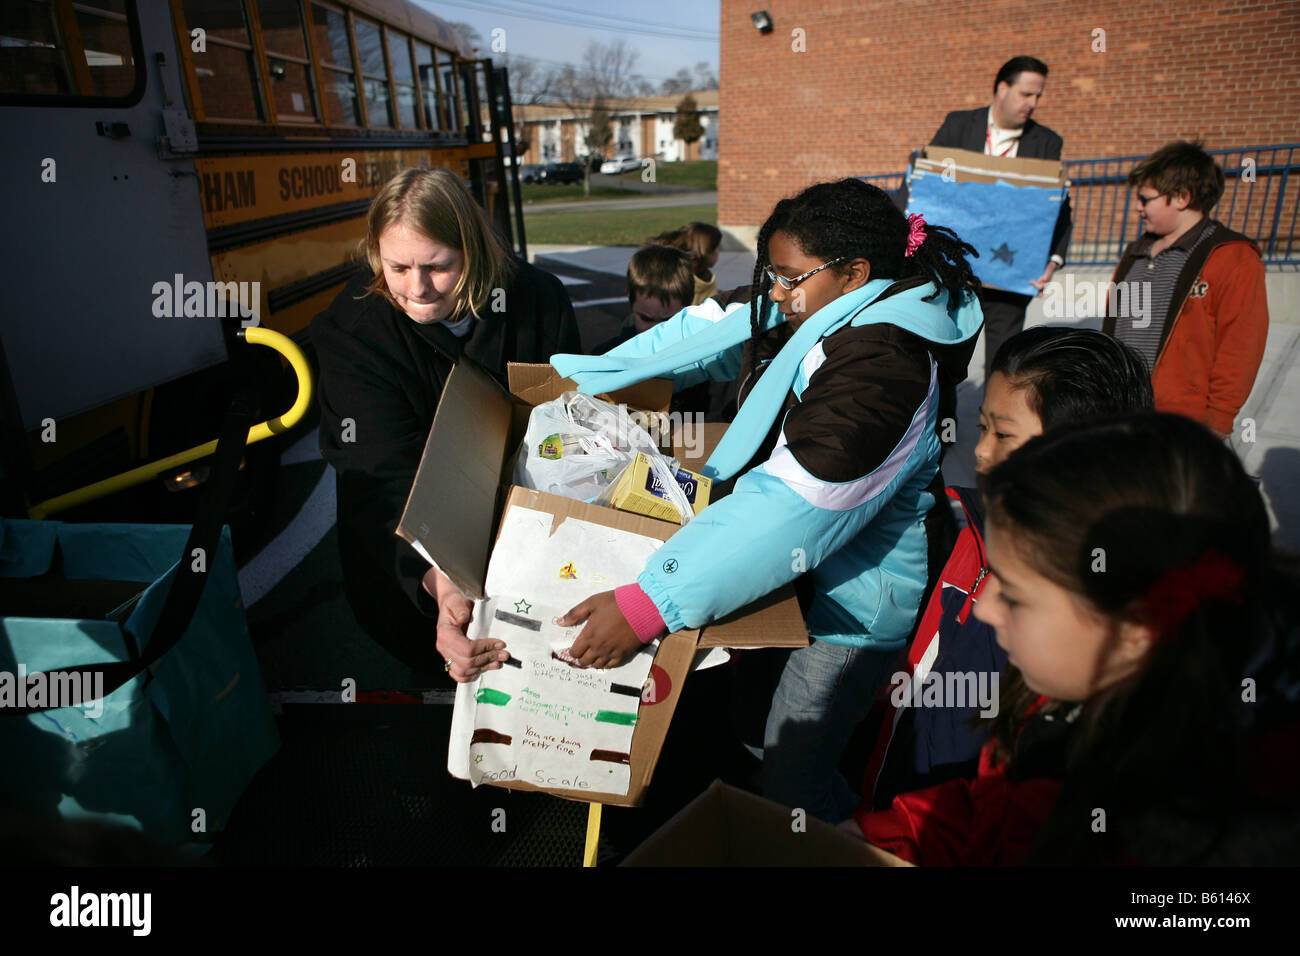 Teachers, volunteers and School Children collecting food for charity. Helping the needy, Stock Photo